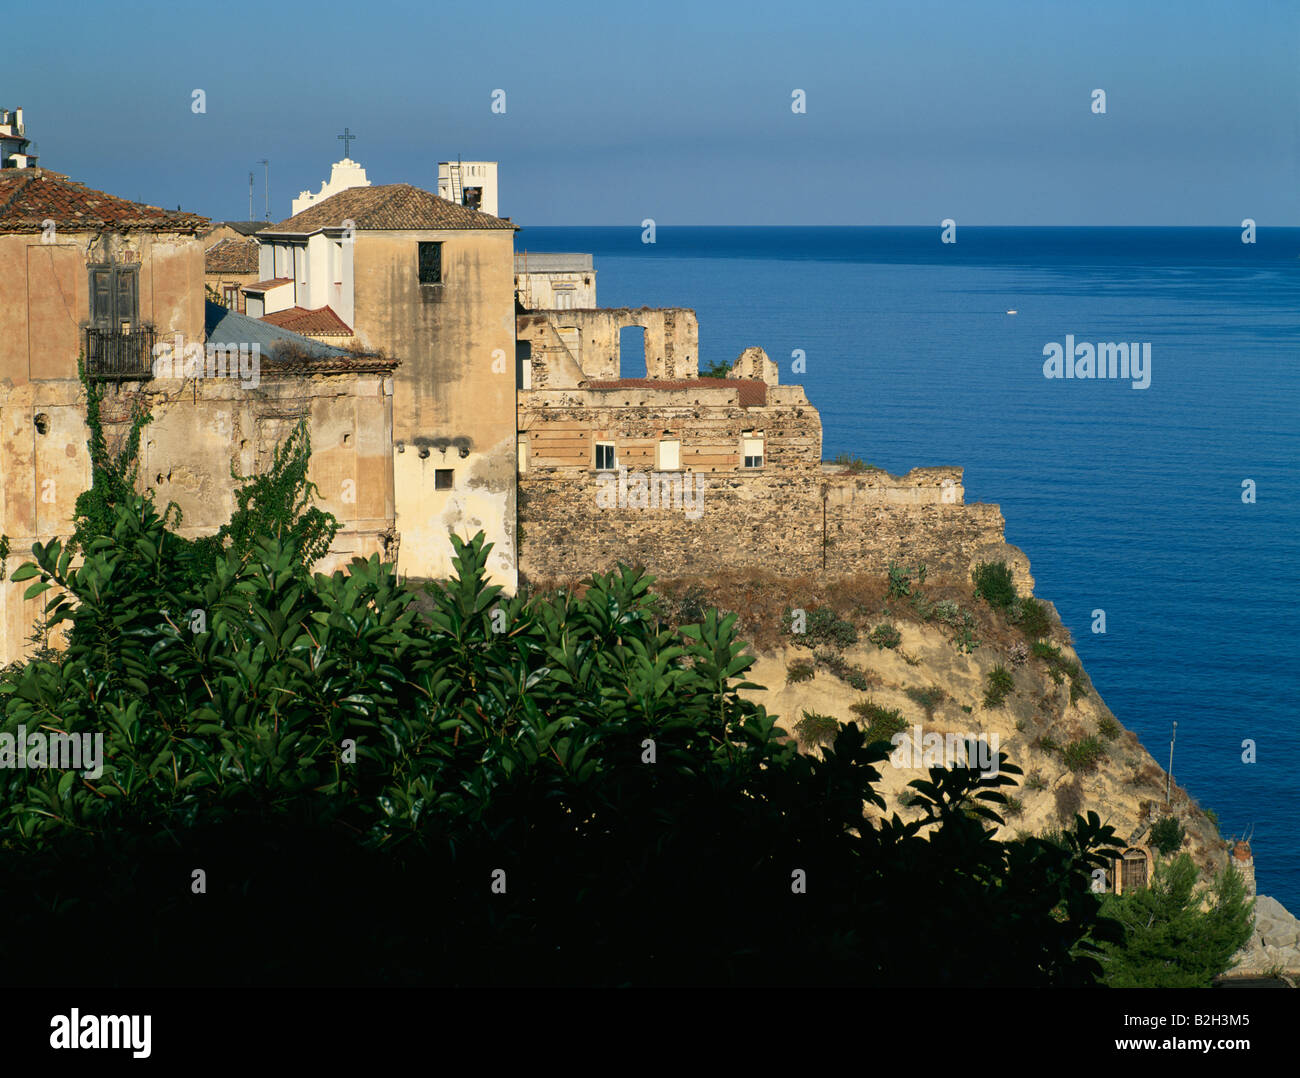 Crumbling ancient buildings on the Calabrian coast Pizzo Calabro ...